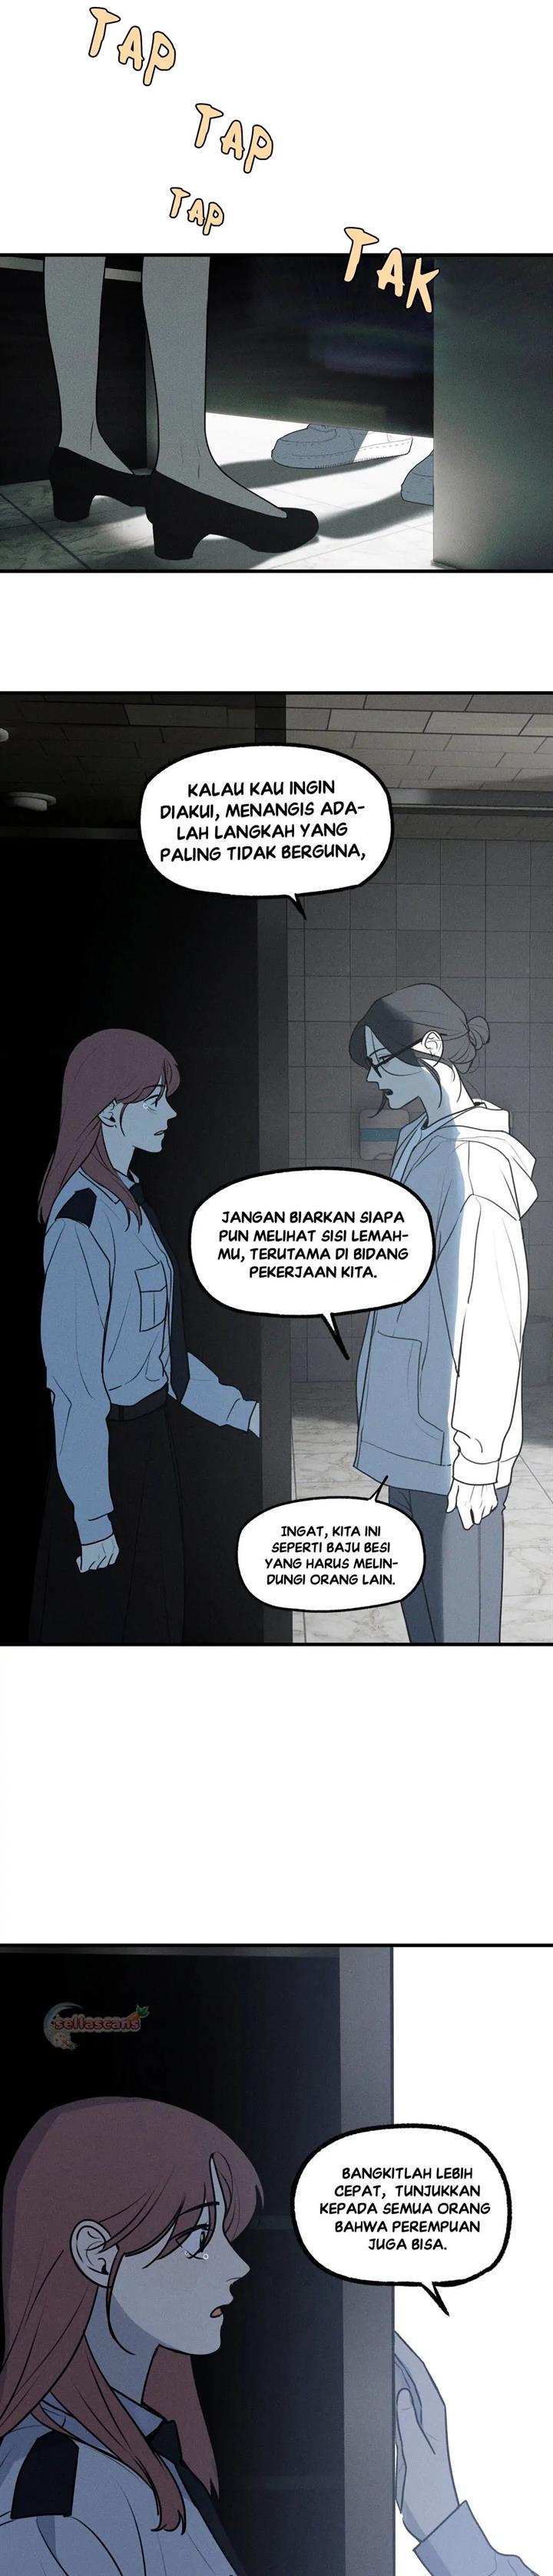 God’s ID Card Chapter 24.5